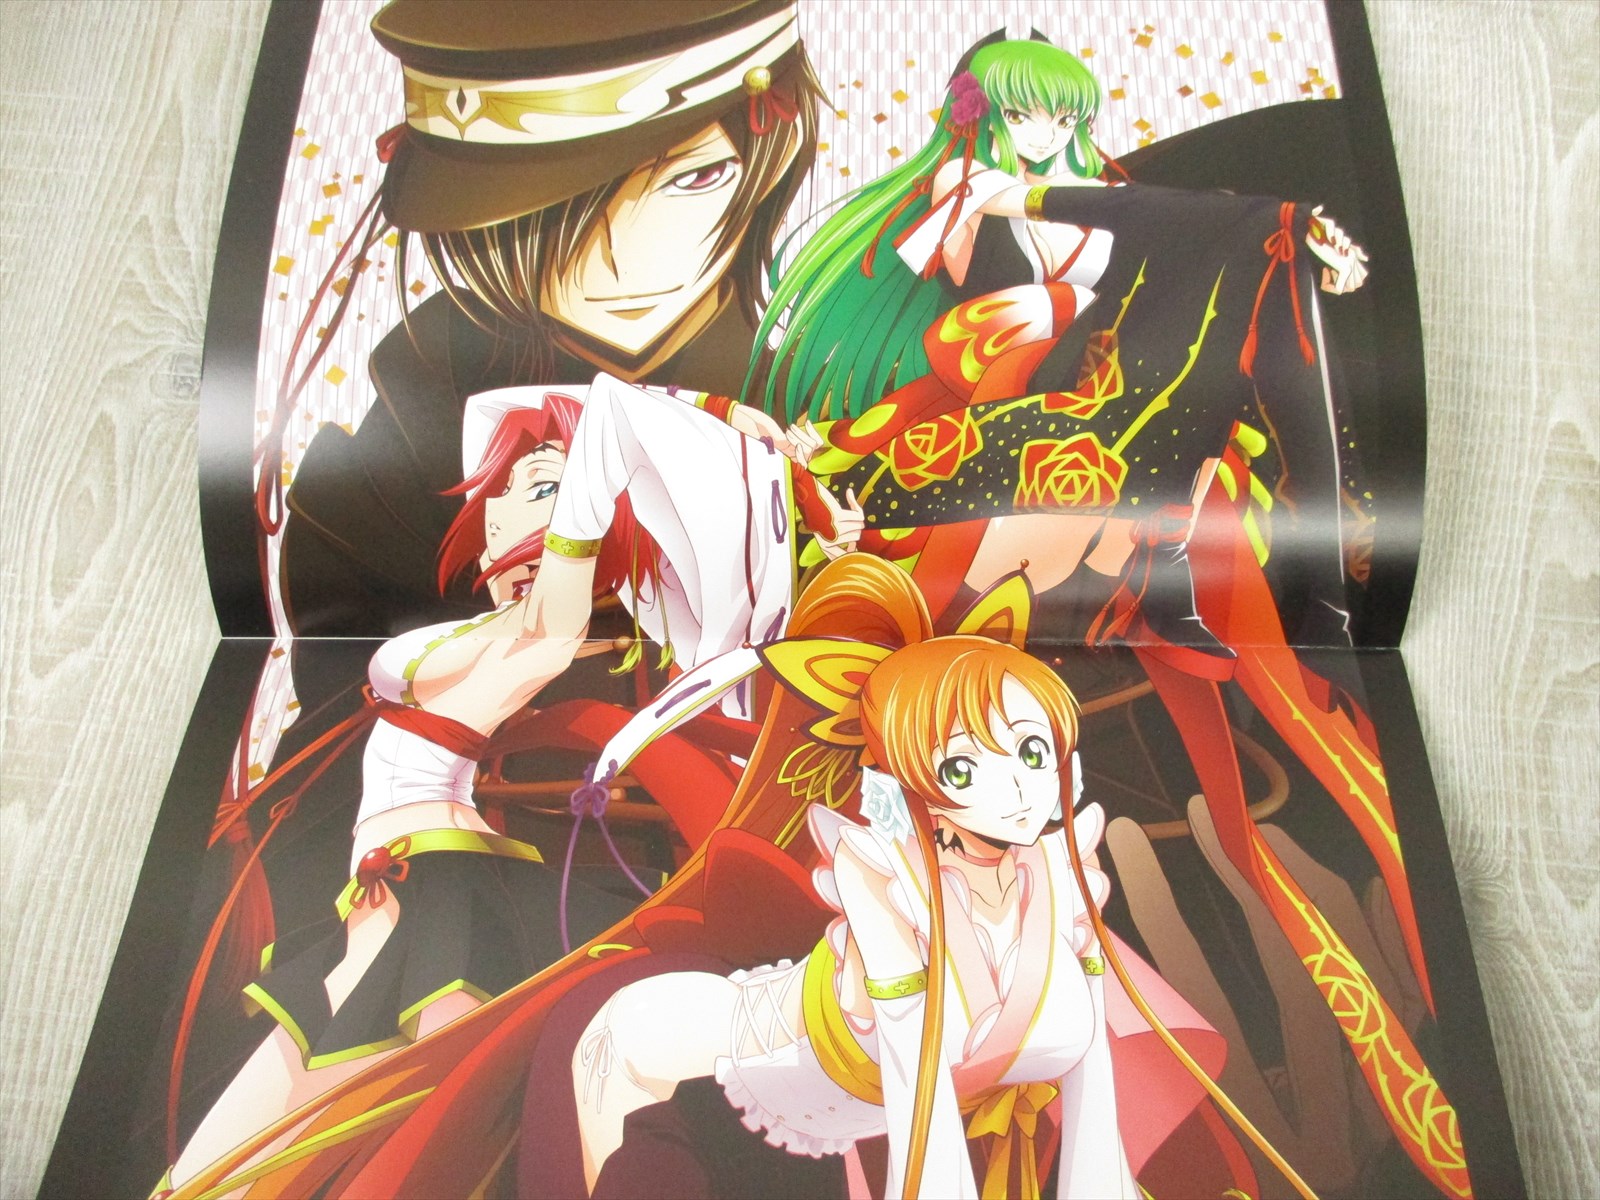 7 Booklet Art Material Japan Book Ltd Code Geass Character Sketches Vol Animation Art Characters Collectibles